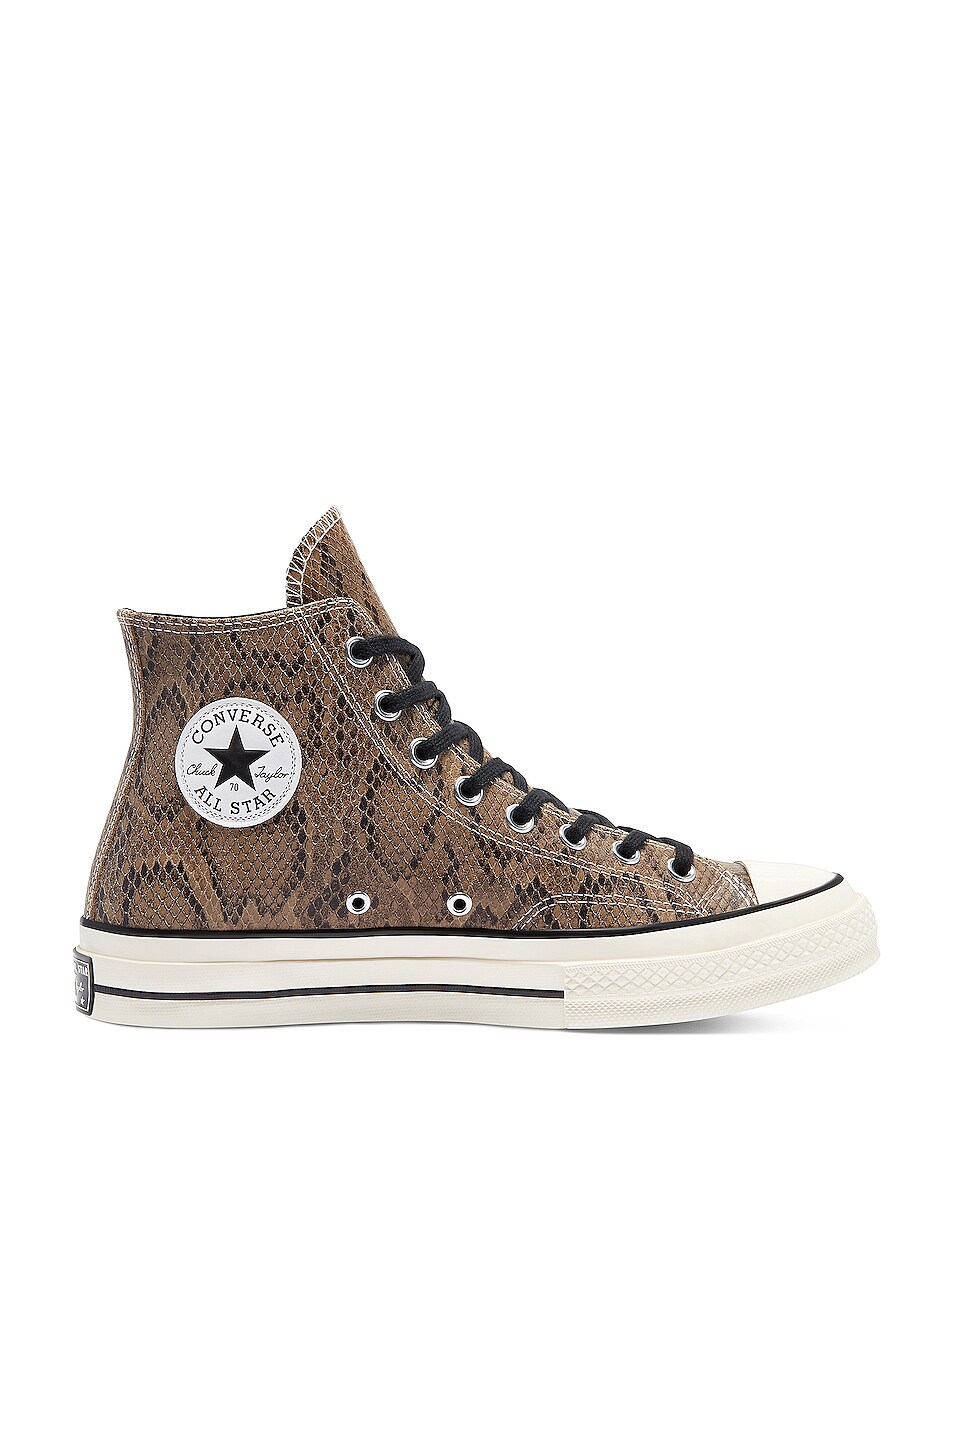 Image 1 of Converse Chuck 70 Archive Reptile Suede Hi in Brown, Egret, & Black